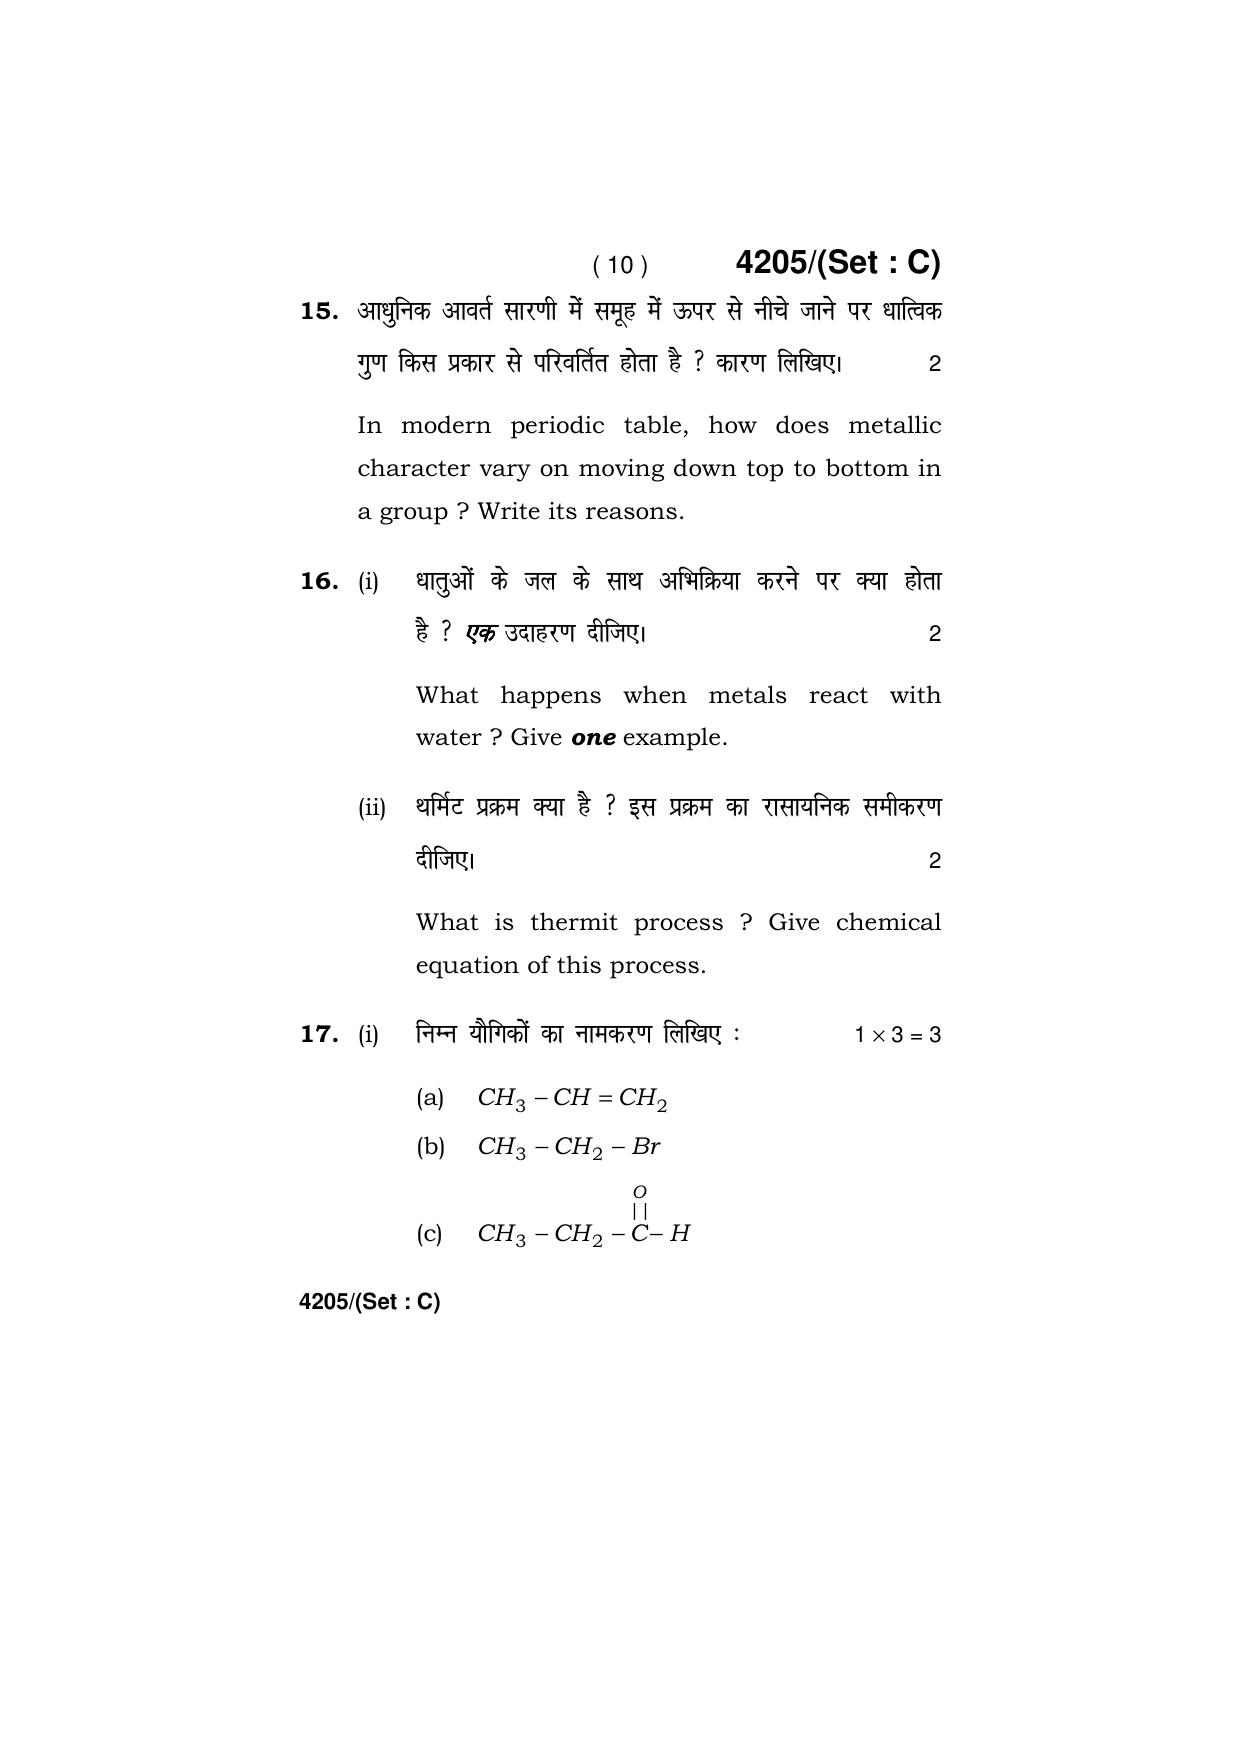 Haryana Board HBSE Class 10 Science (All Set) 2019 Question Paper - Page 42